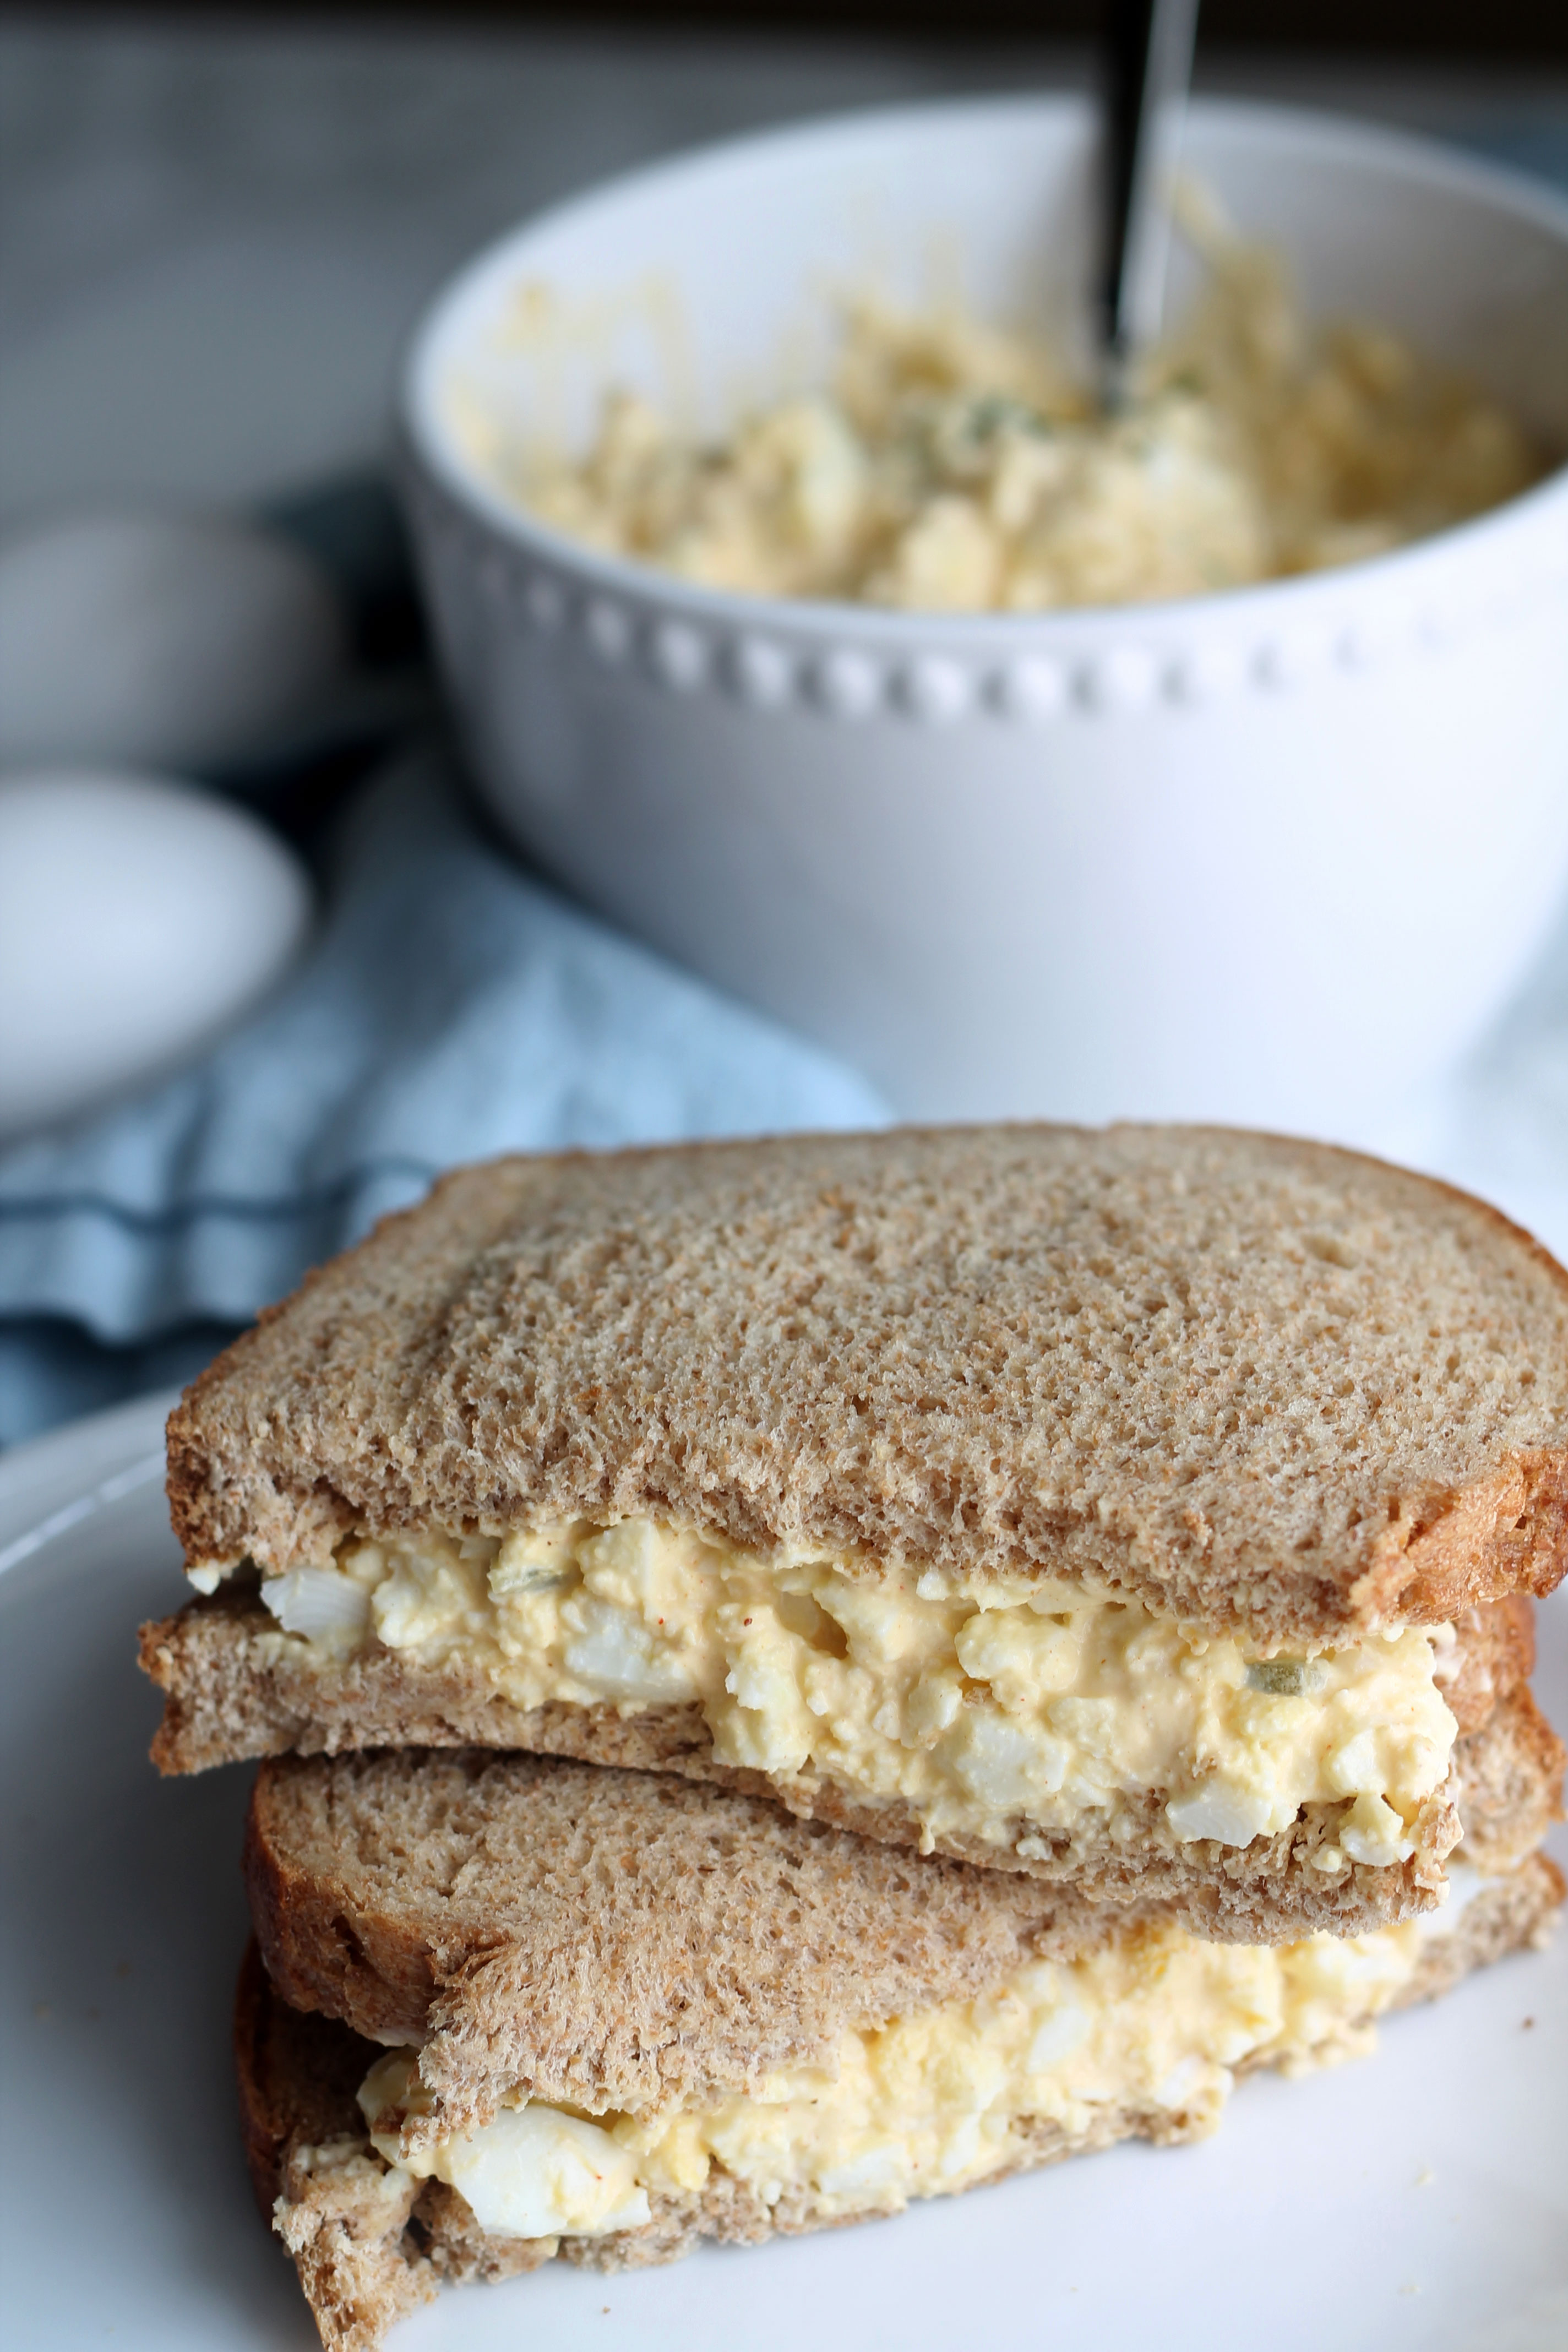 This egg salad is creamy, easy and delicious